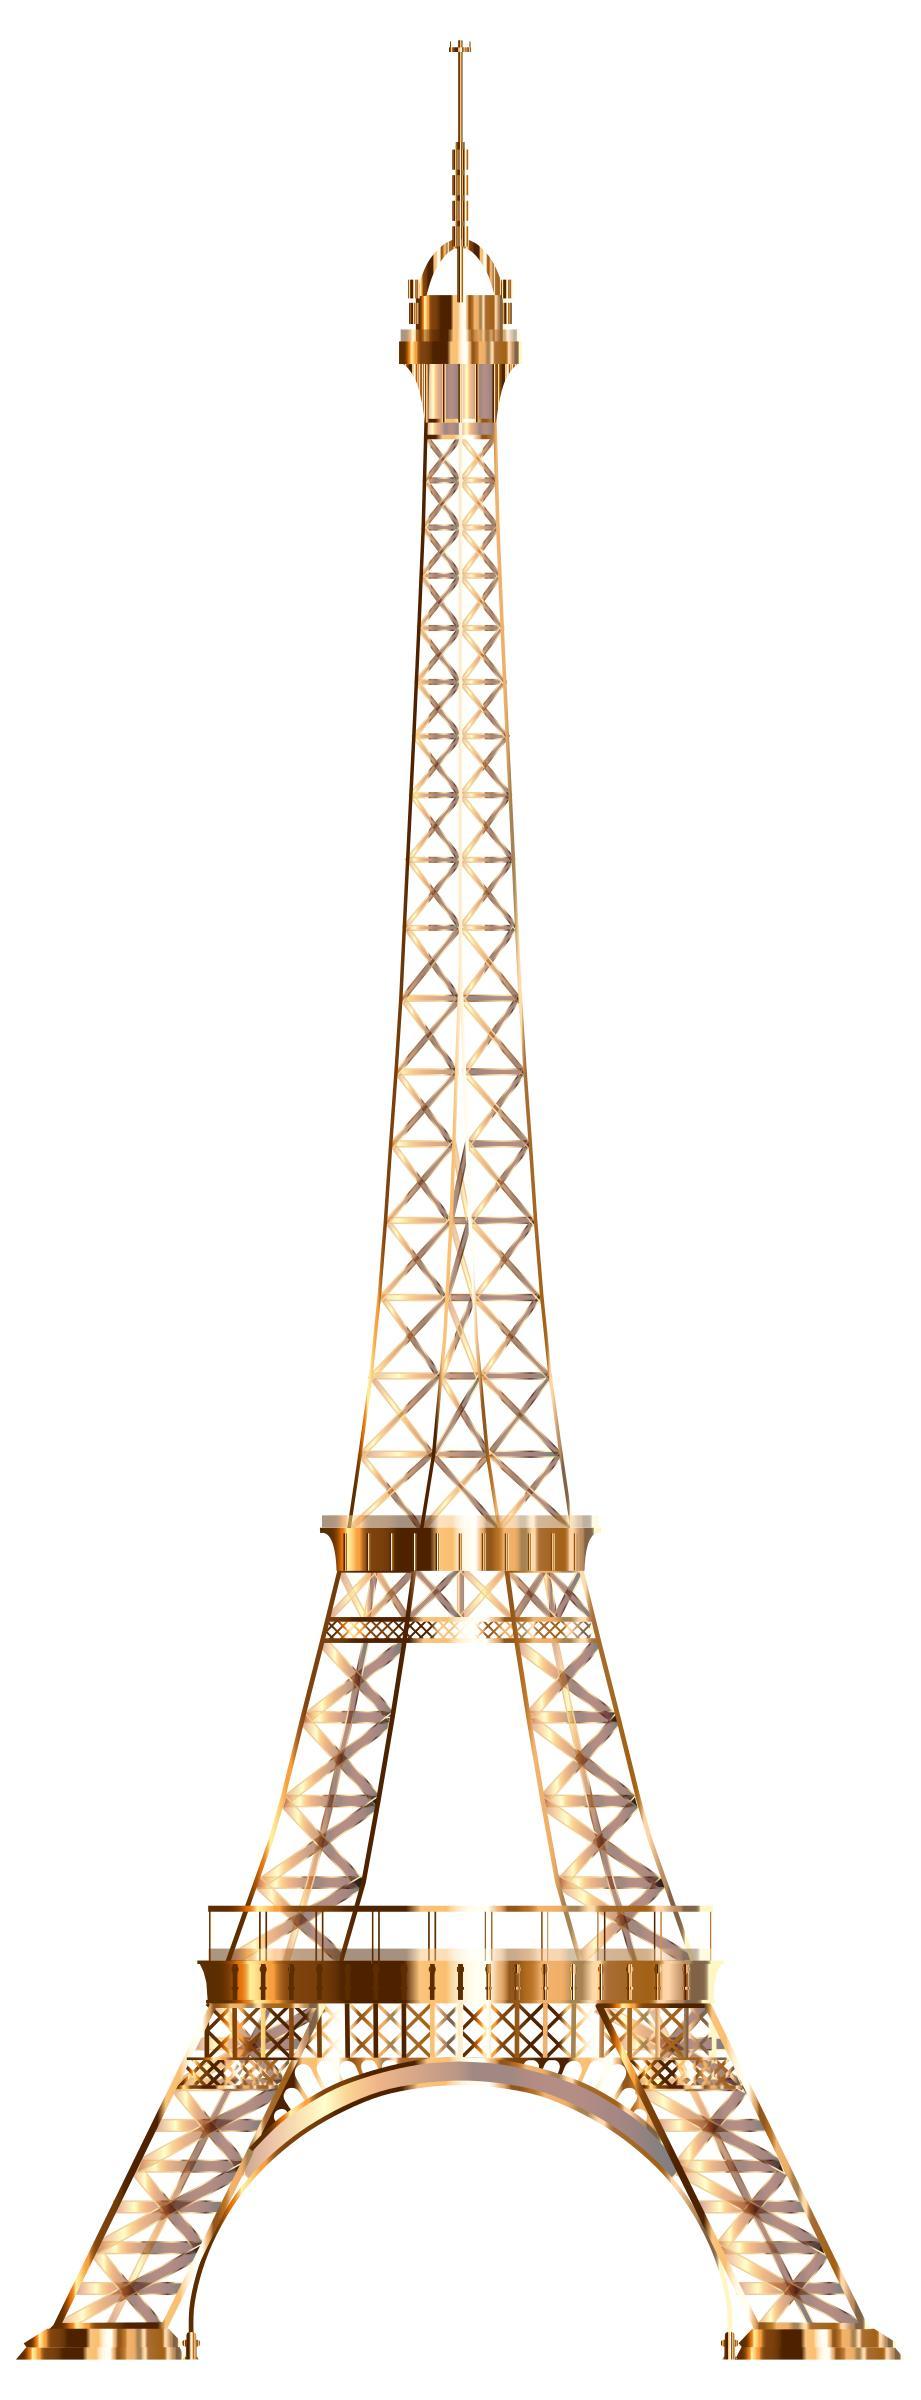 Eiffel Tower Shiny Copper No Background png transparent